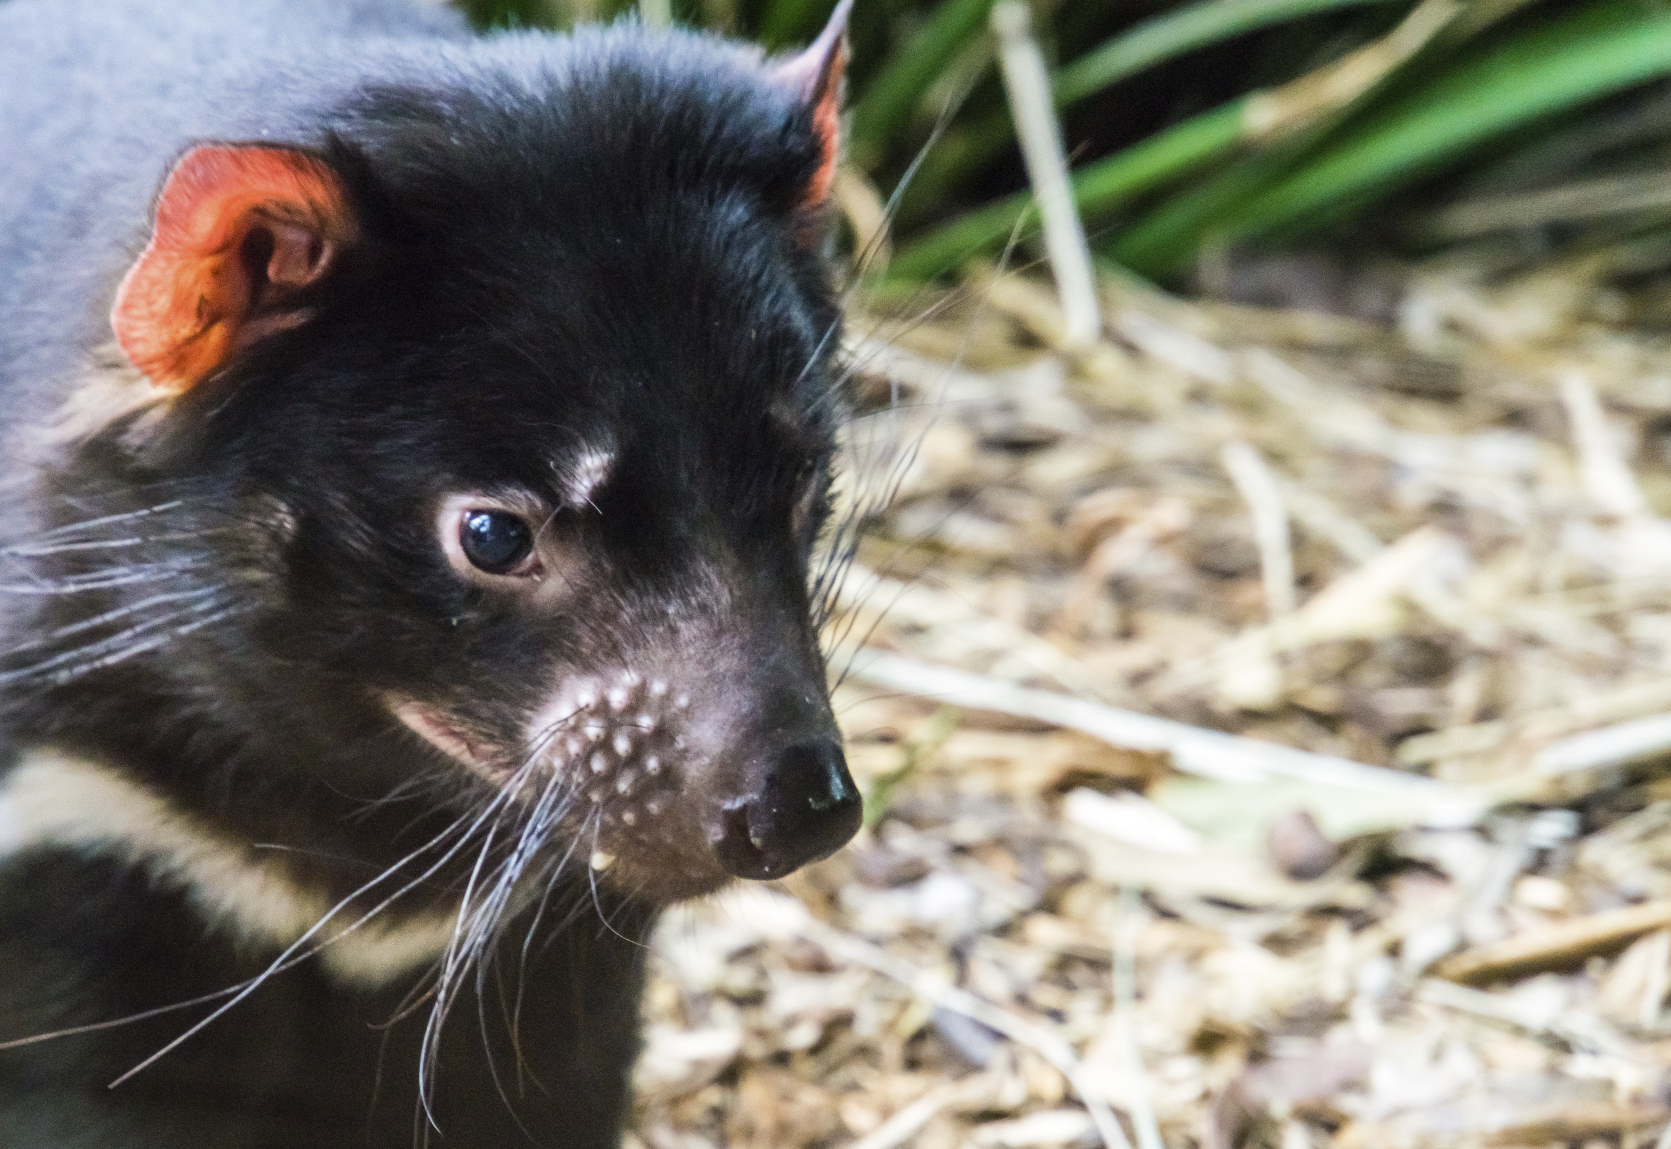 where does the tasmanian devil live and is there really an animal called the tasmanian devil